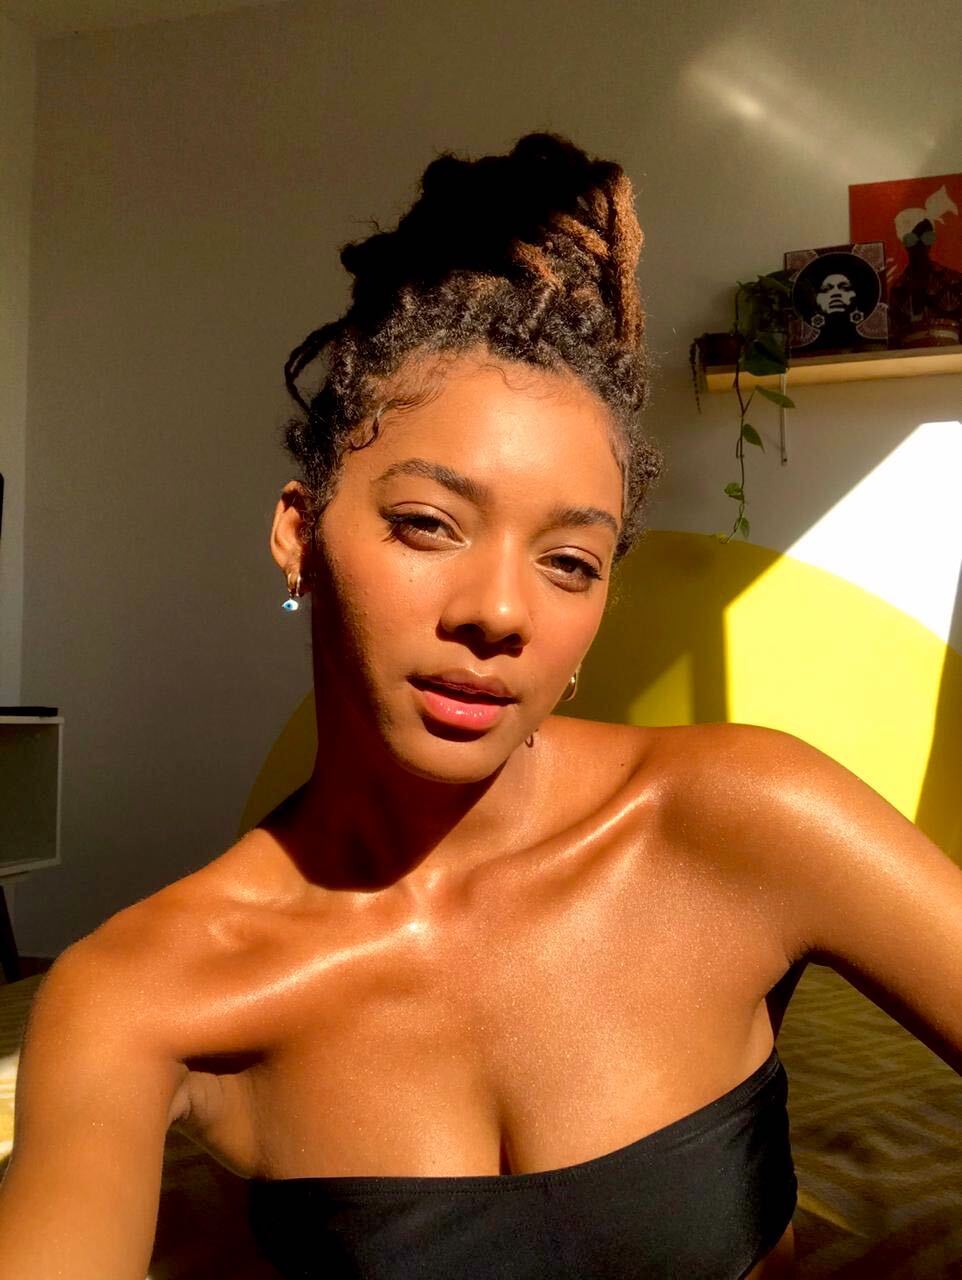 How to Apply A FLAWLESS Self-Tan (Every. Single. Time.) – Sol de Janeiro